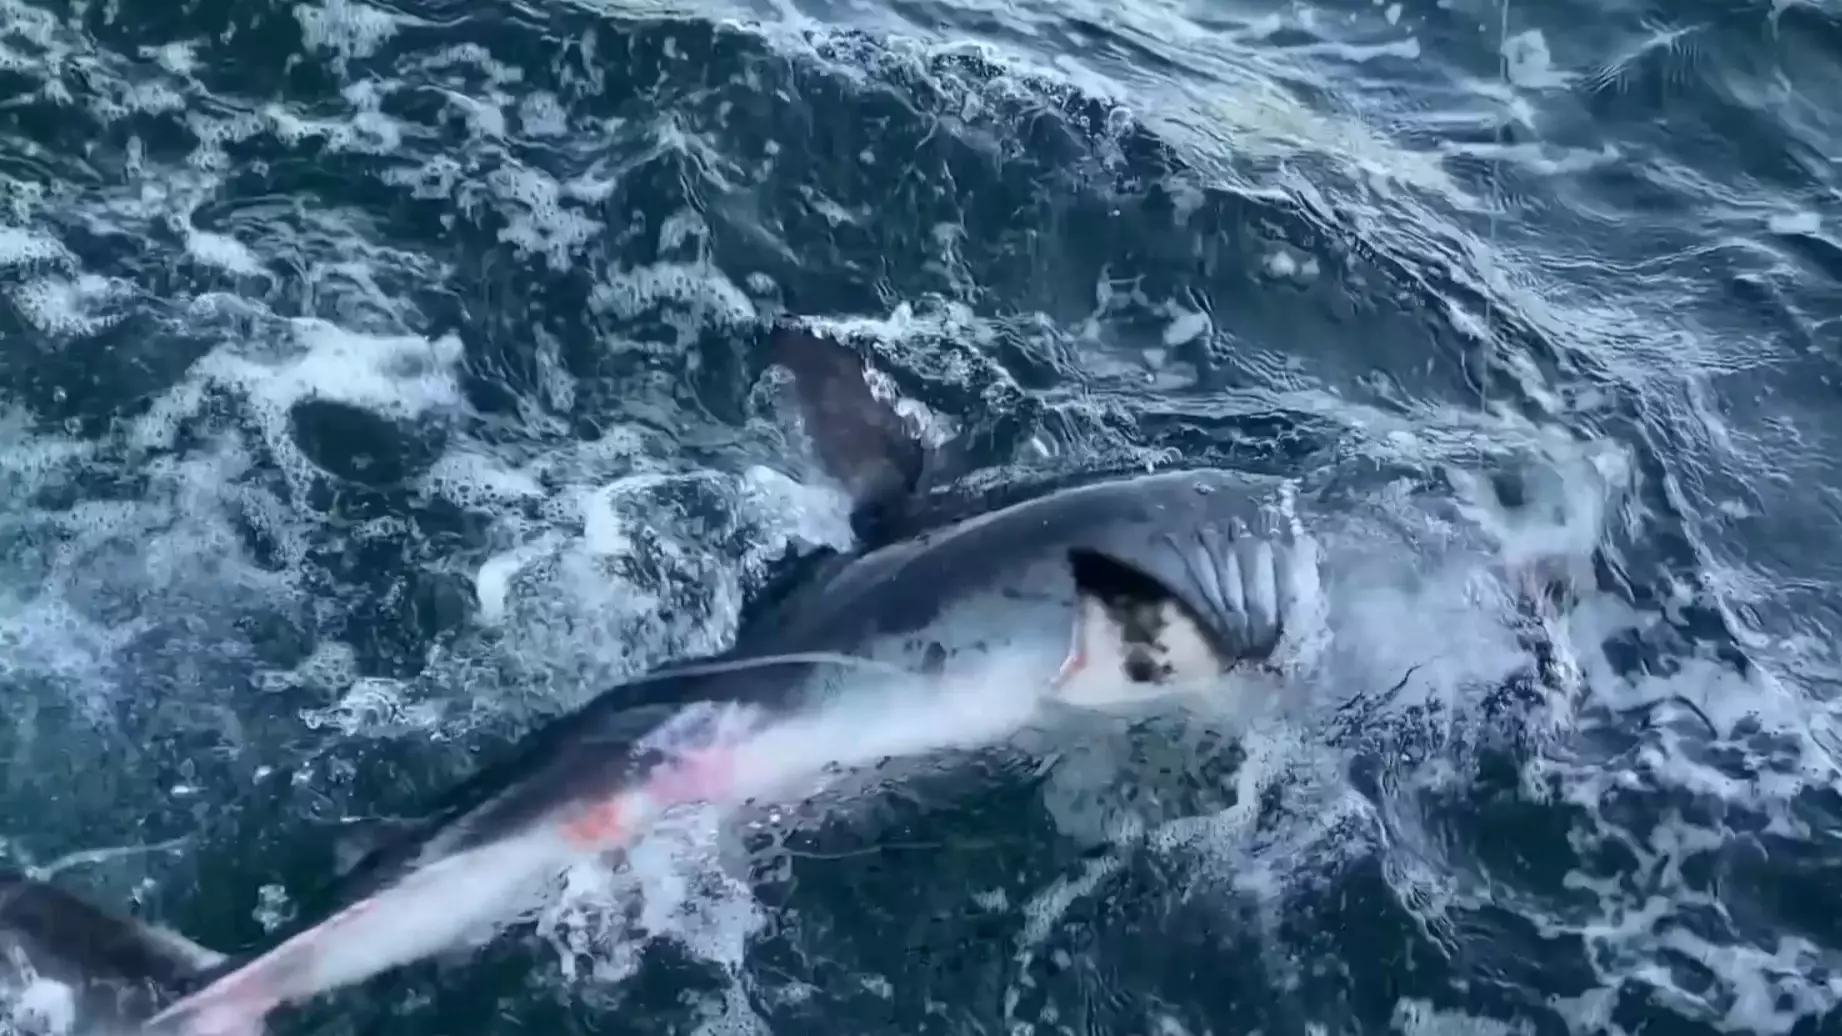 Fisherman Furious After Great White Shark Takes Bite Out Of Prize Tuna